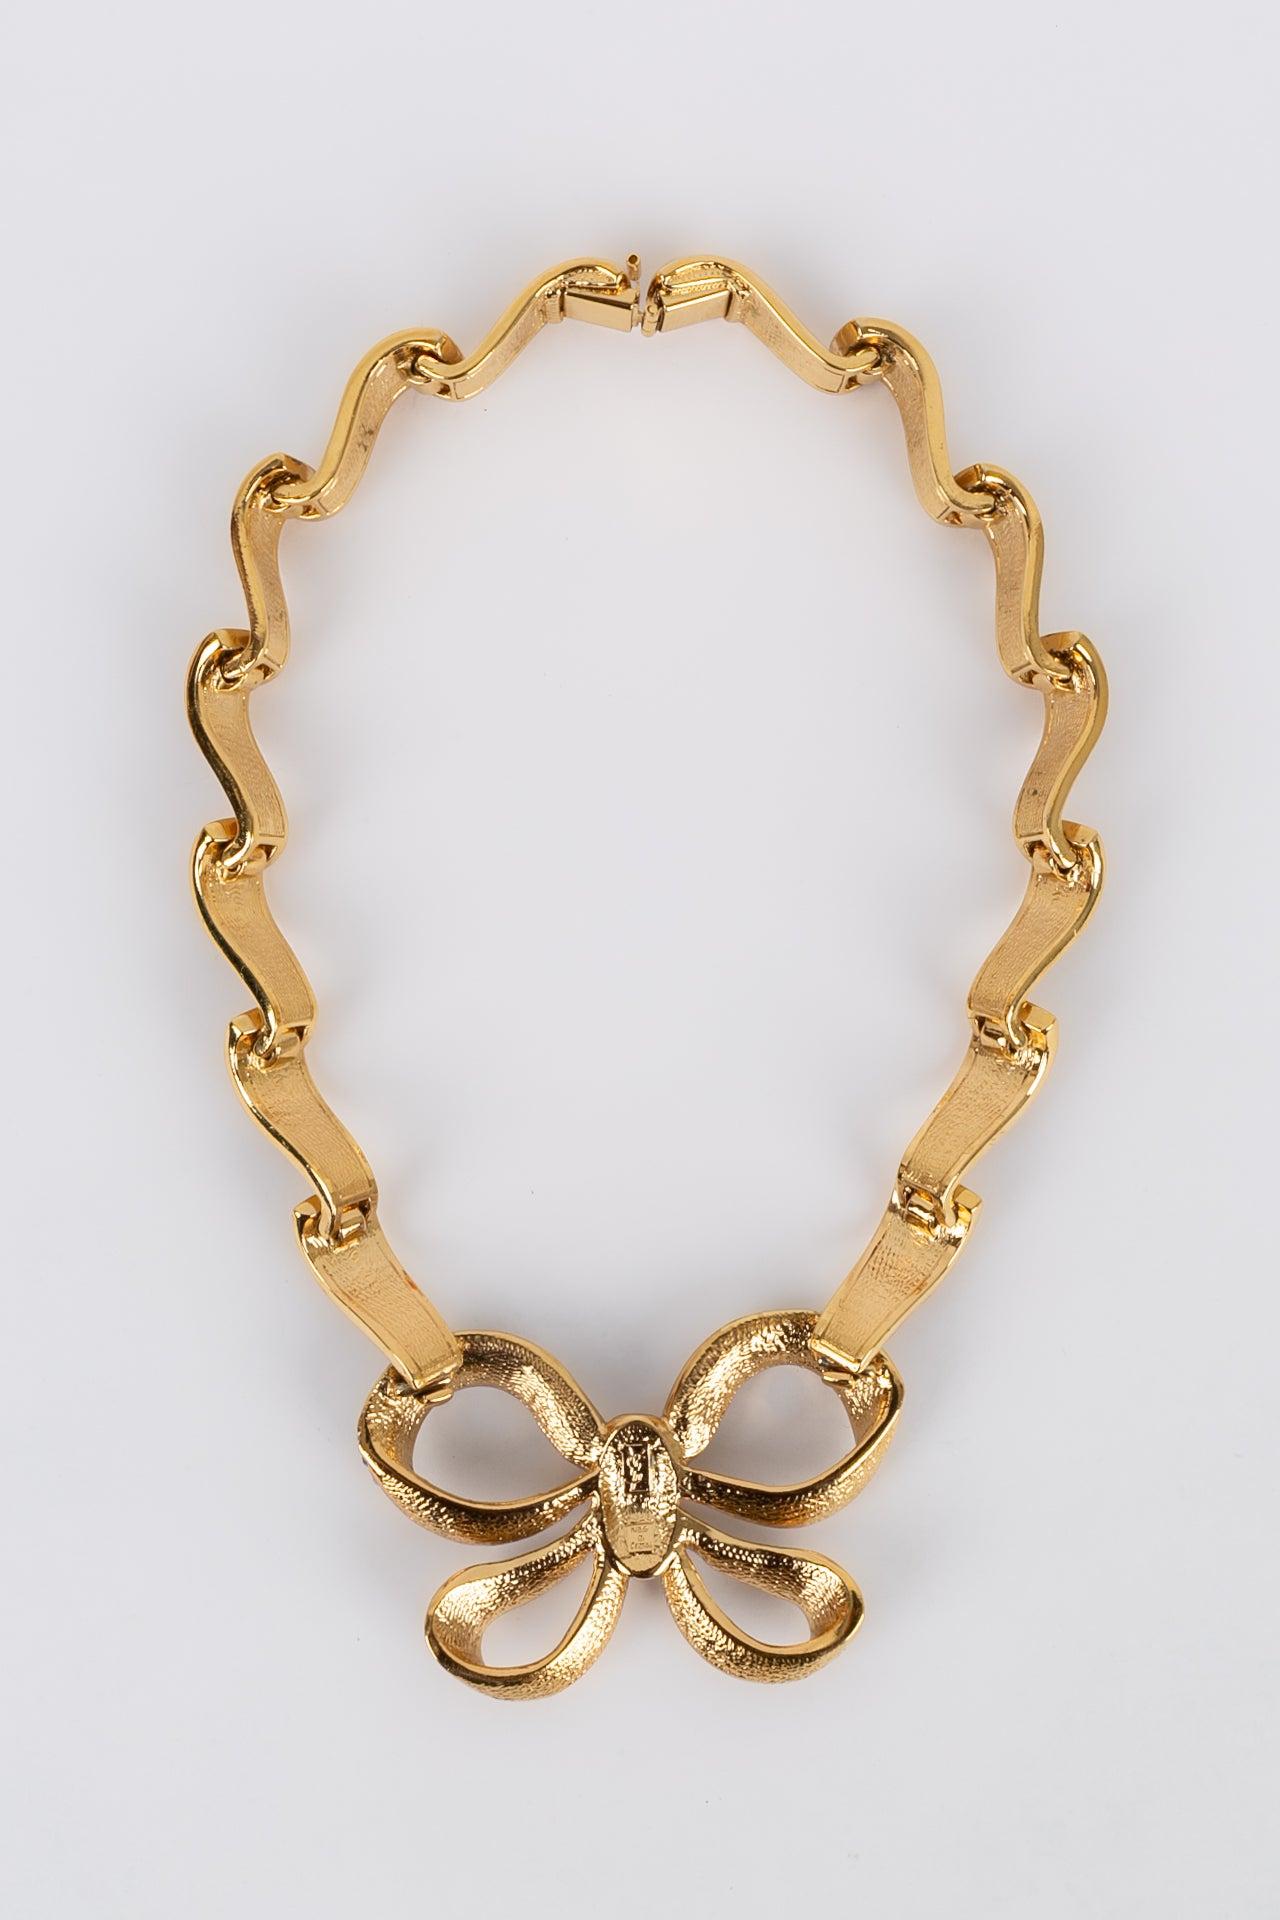 Yves Saint Laurent Bow Necklace in Gold Metal For Sale 1